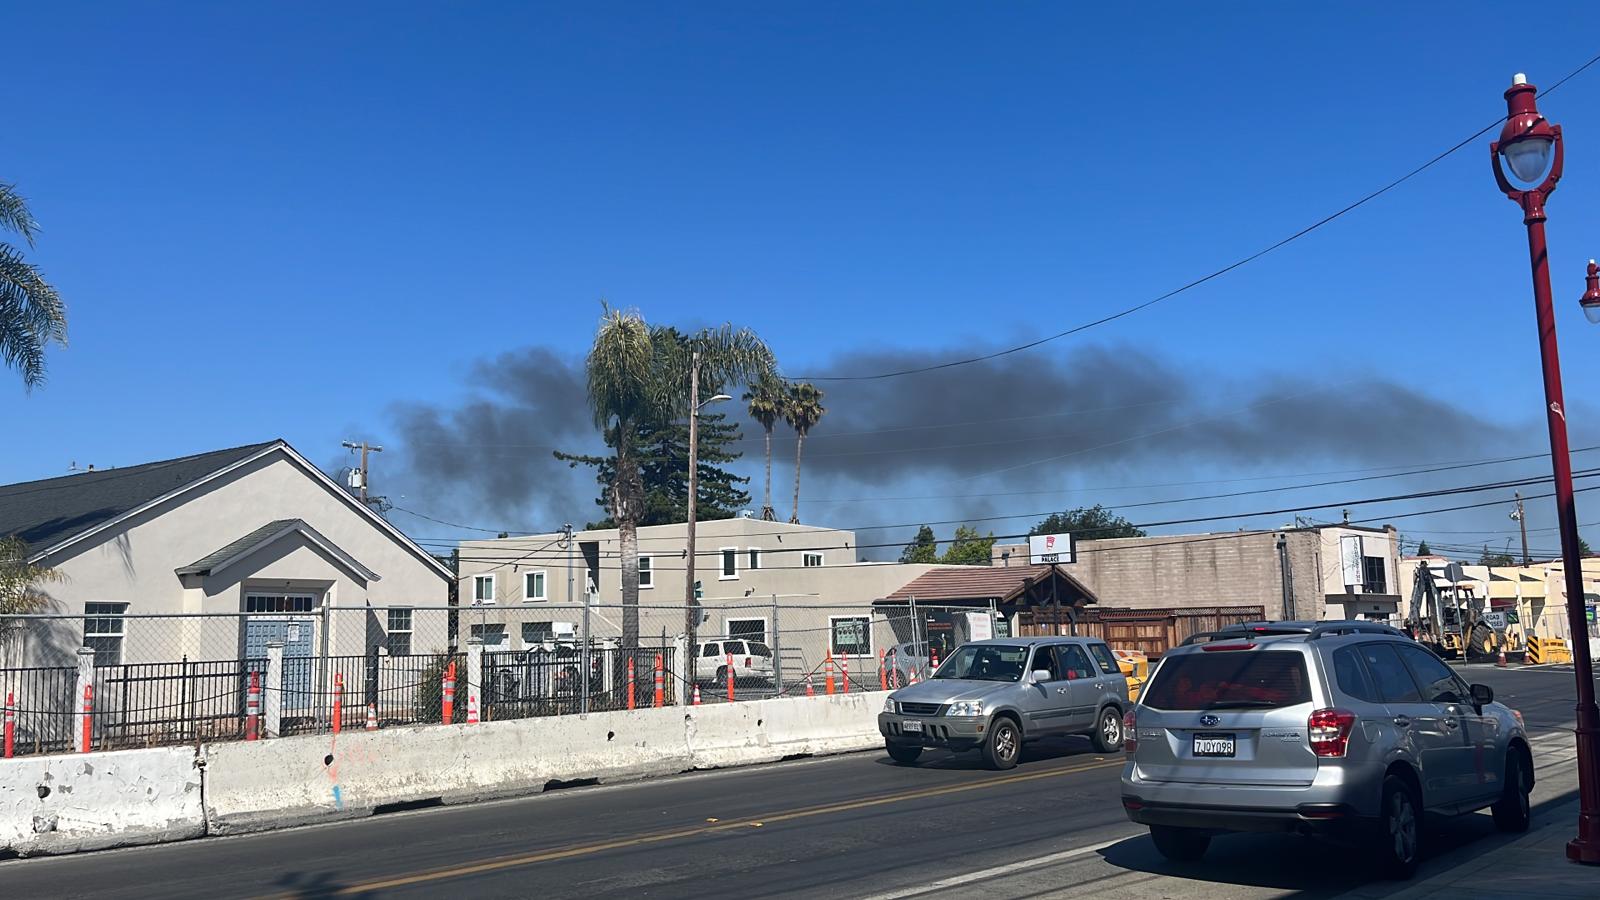 A dog was killed and 10 people displaced after a house fire in Redwood City Thursday afternoon.